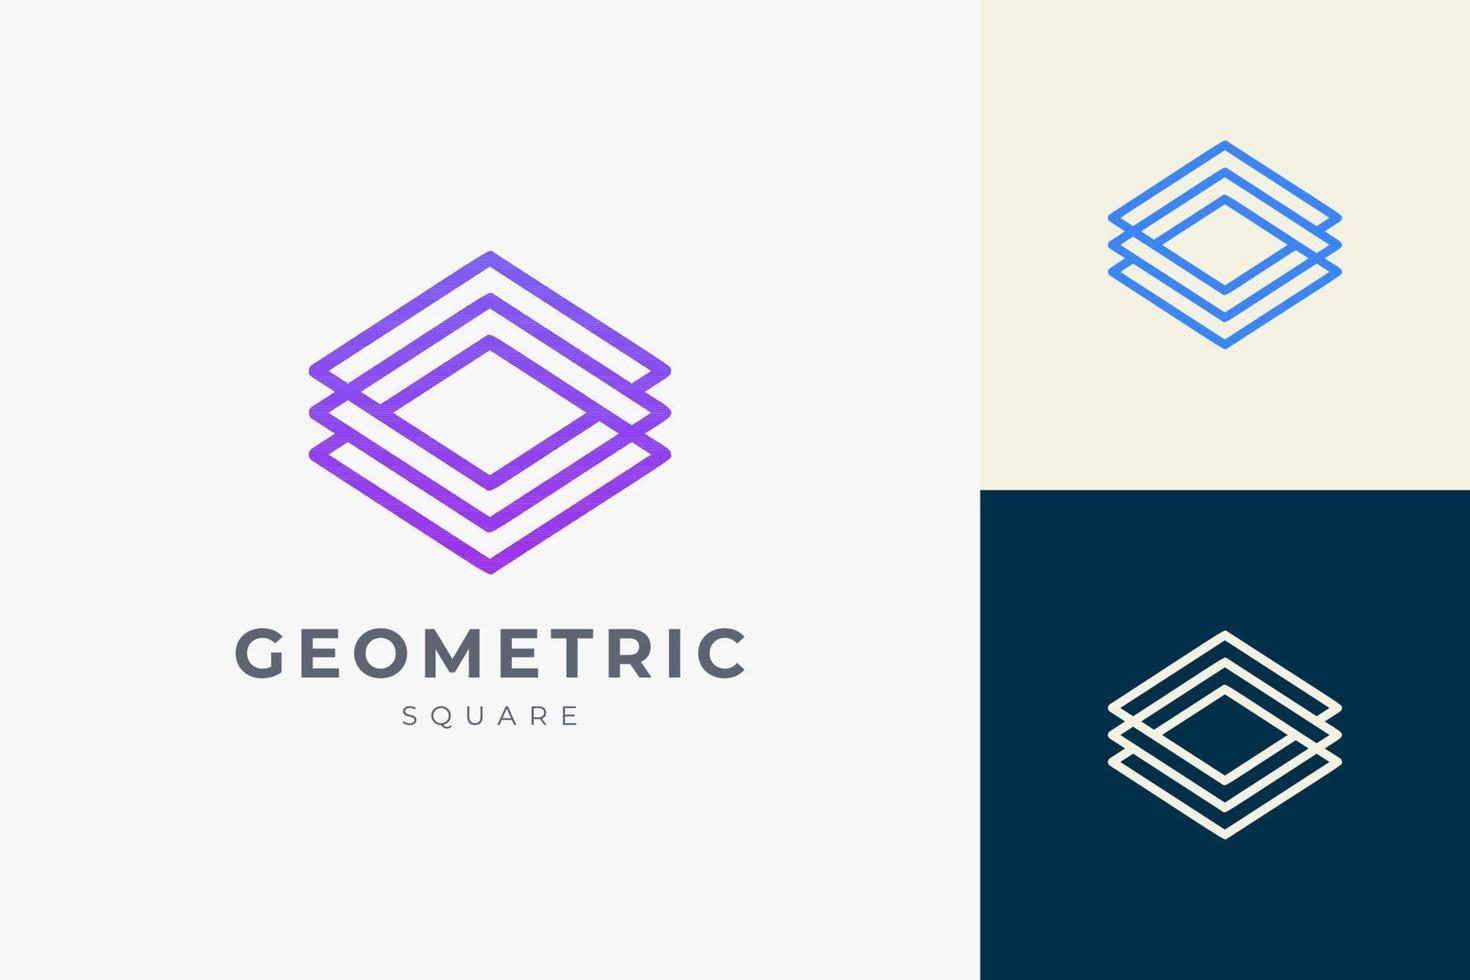 Software or techno logo in abstract rhombus shape technology vector